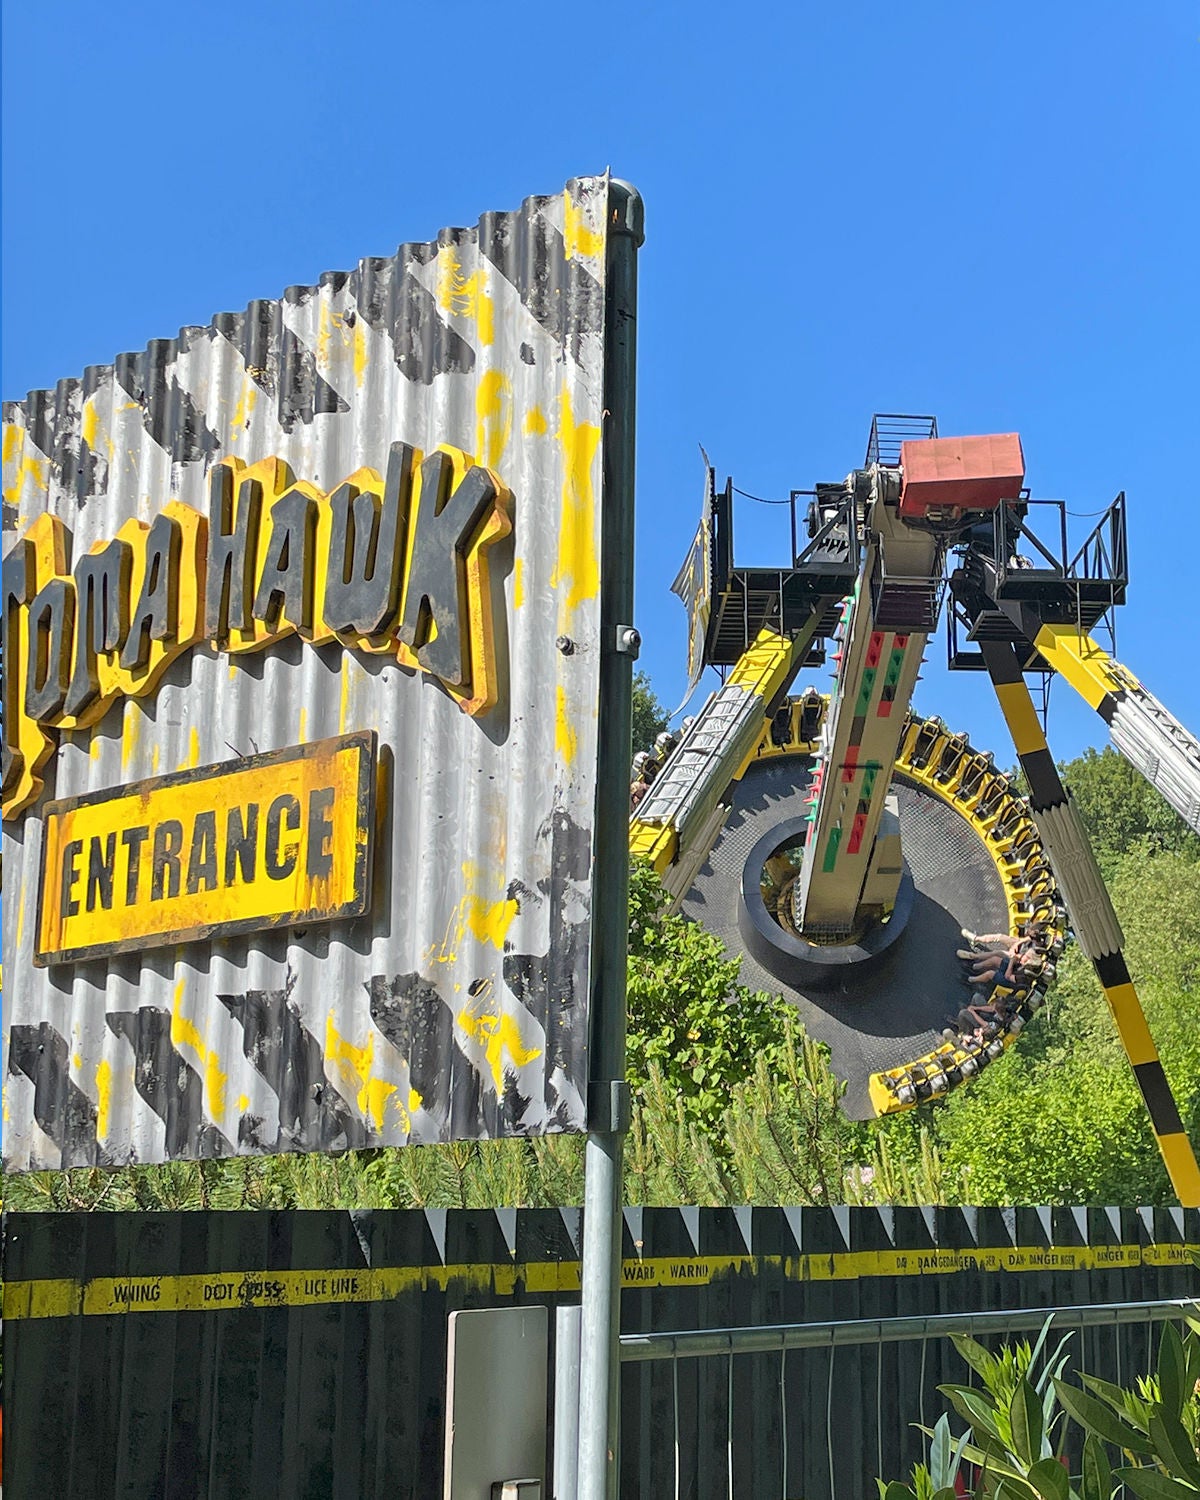 The entrance to the Tomahawk attraction at Walibi Holland.